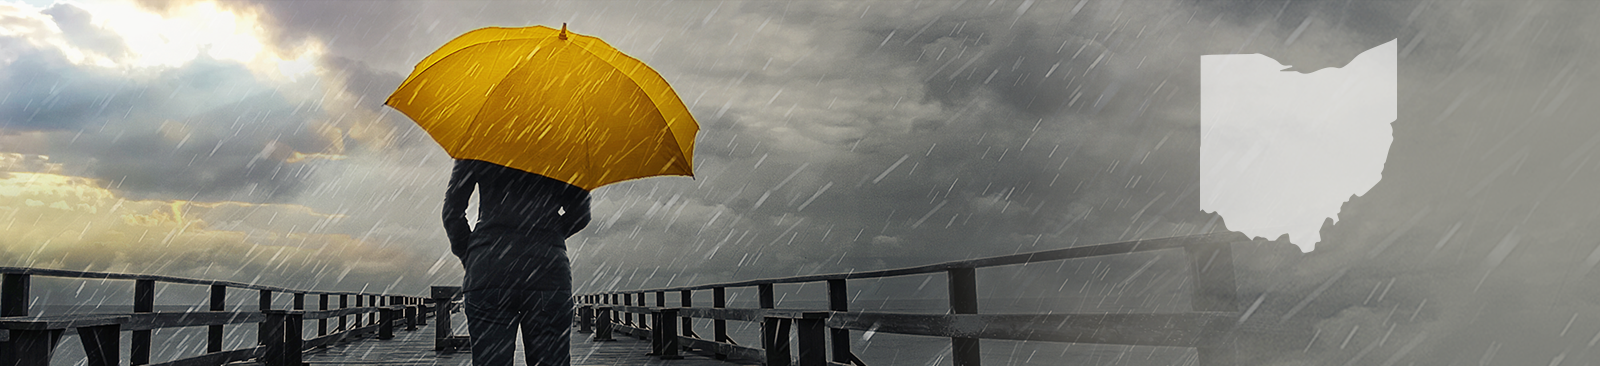 A person stands with their back to the camera, carrying a bright yellow umbrella in the middle of a storm. They stand on a pier, looking out at the stormy sky, which simultaneously looks threatening and hopeful as some of the clouds part to reveal a glimpse of sunshine.